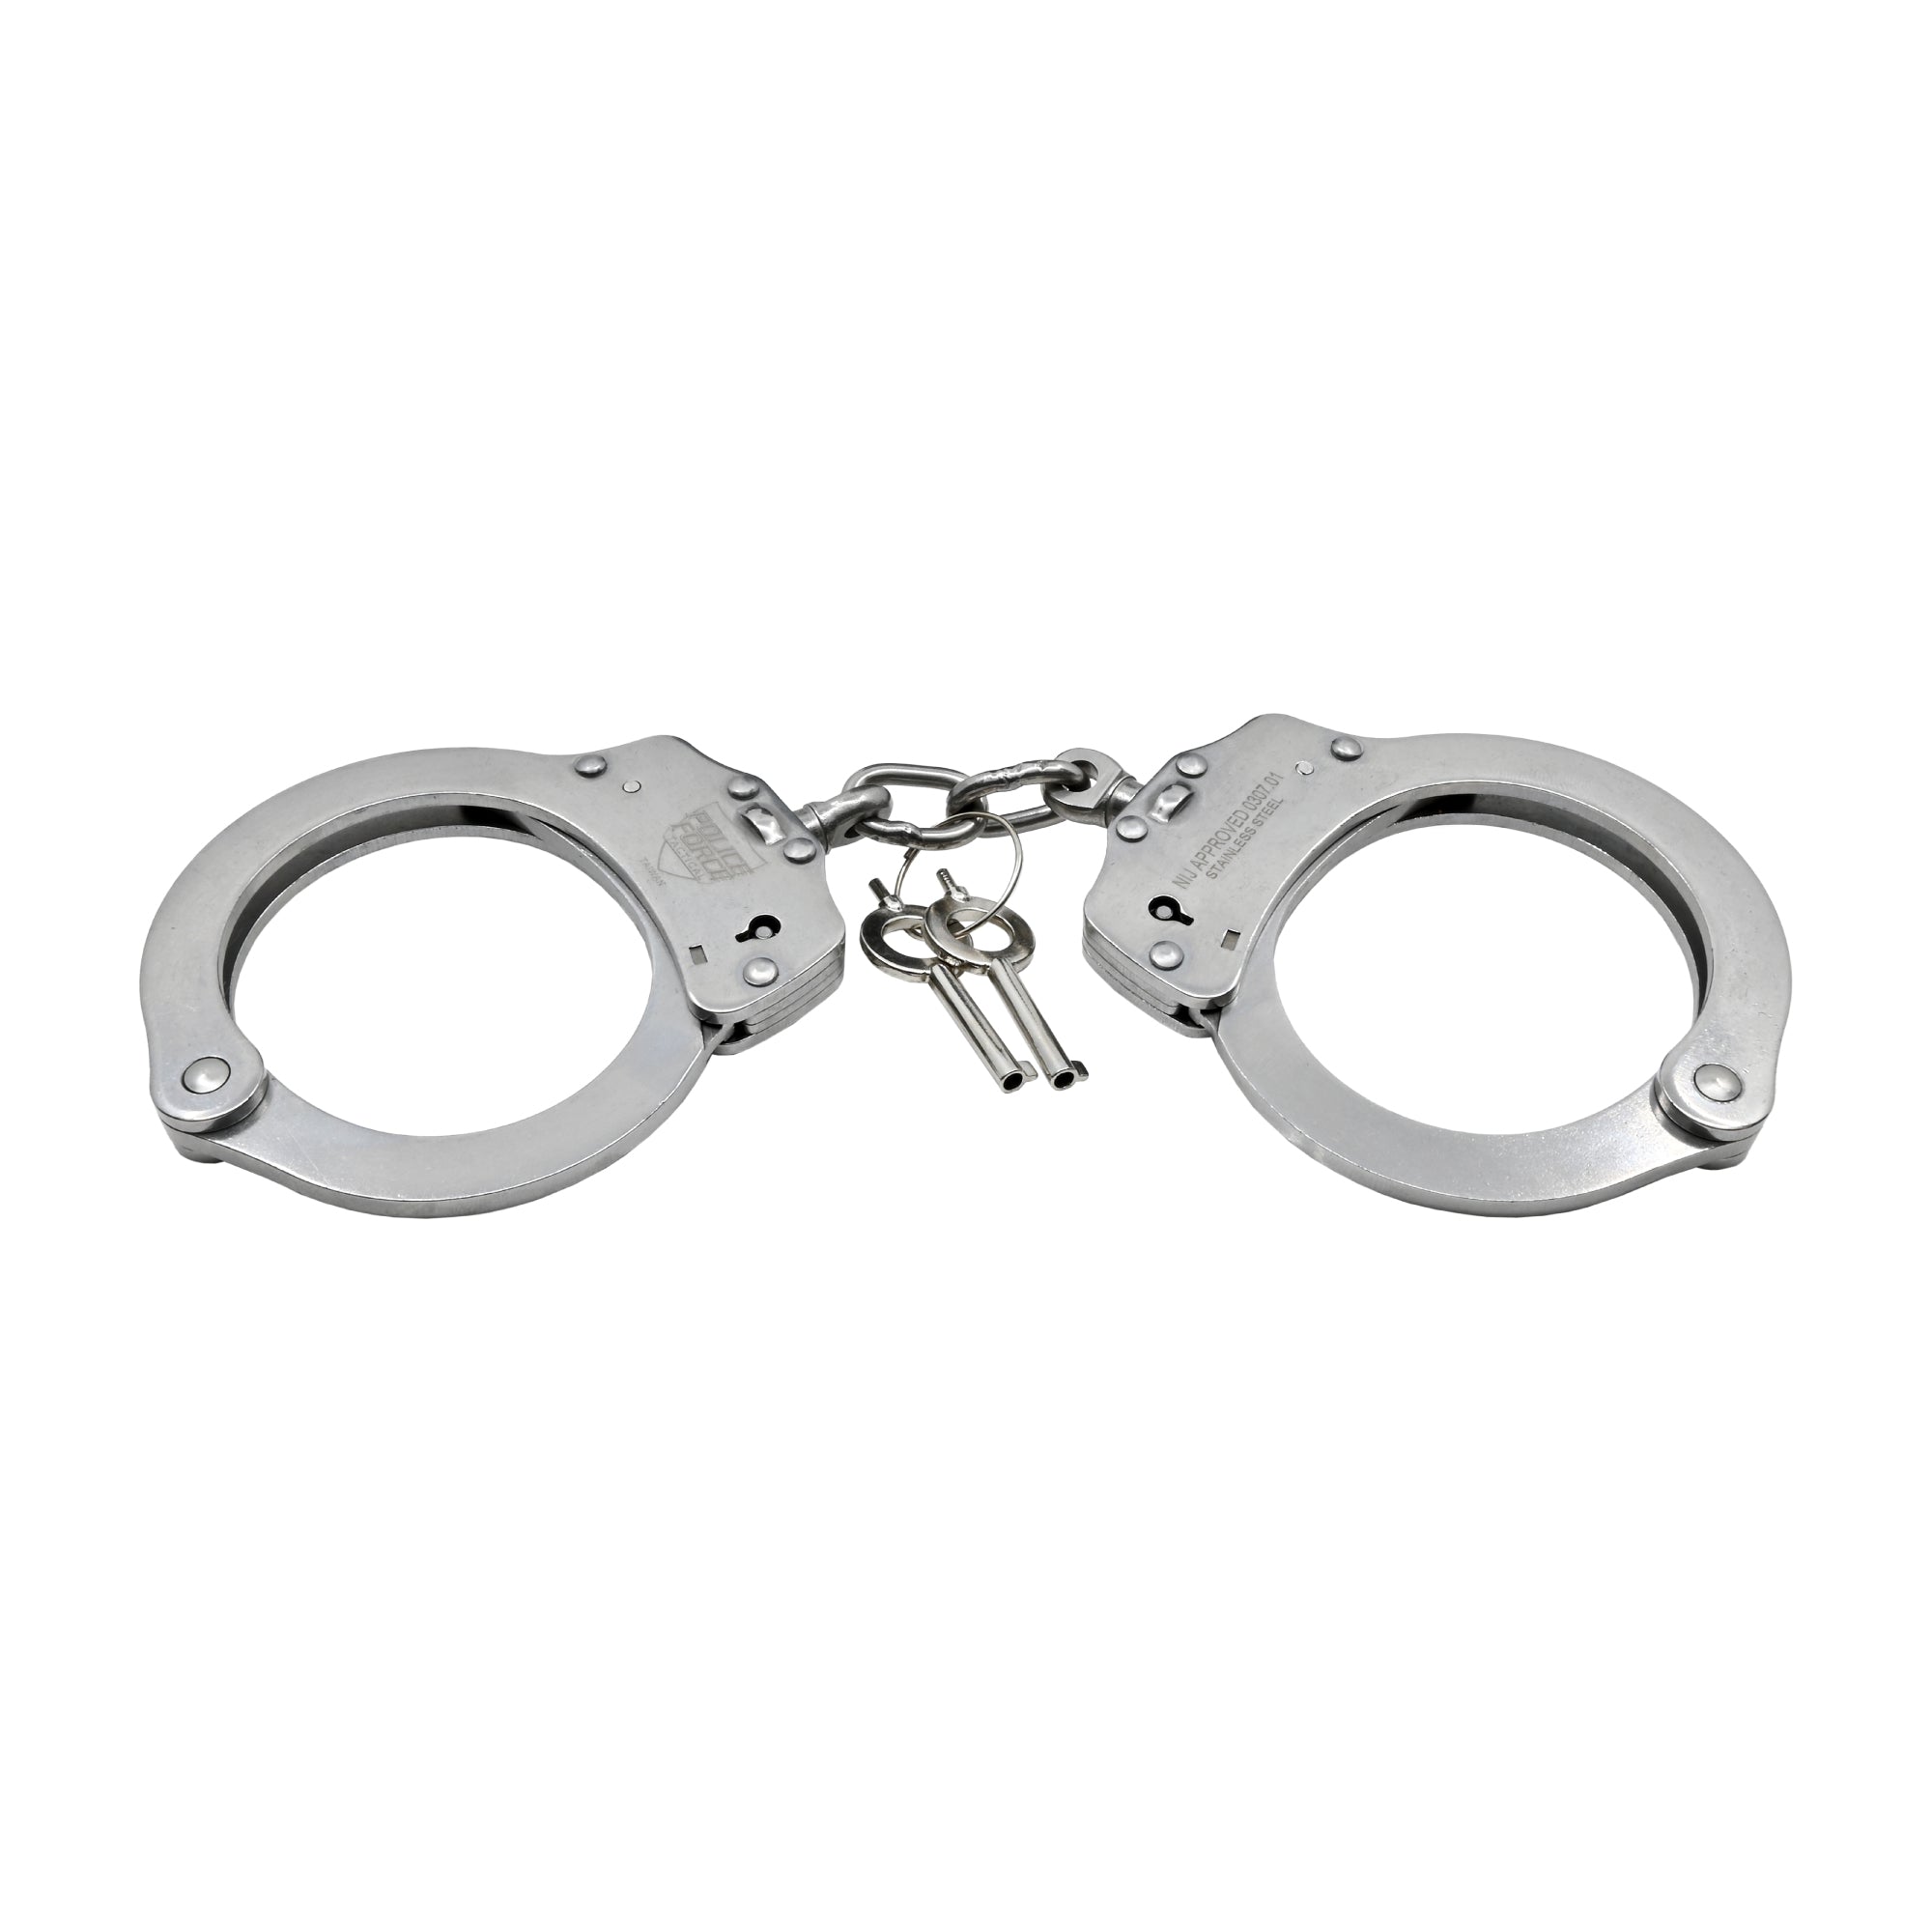 Stainless Steel NIJ Handcuffs - Cutting Edge Products Inc